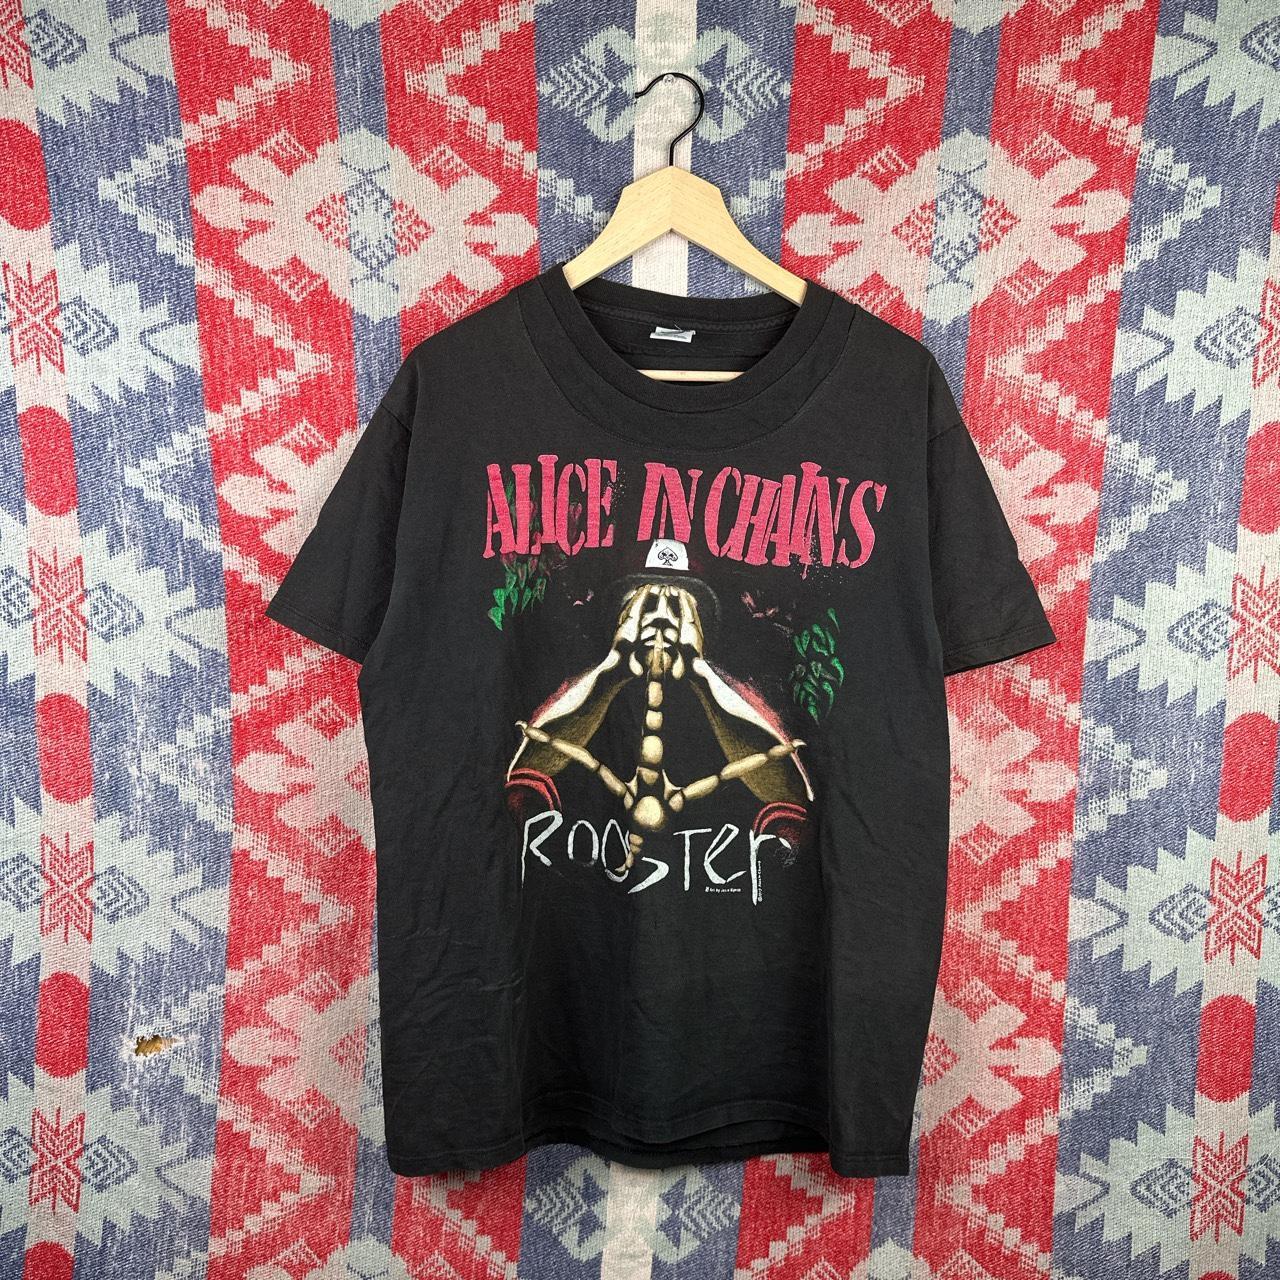 Vintage 1990’s Alice In Chains Rooster t shirt...